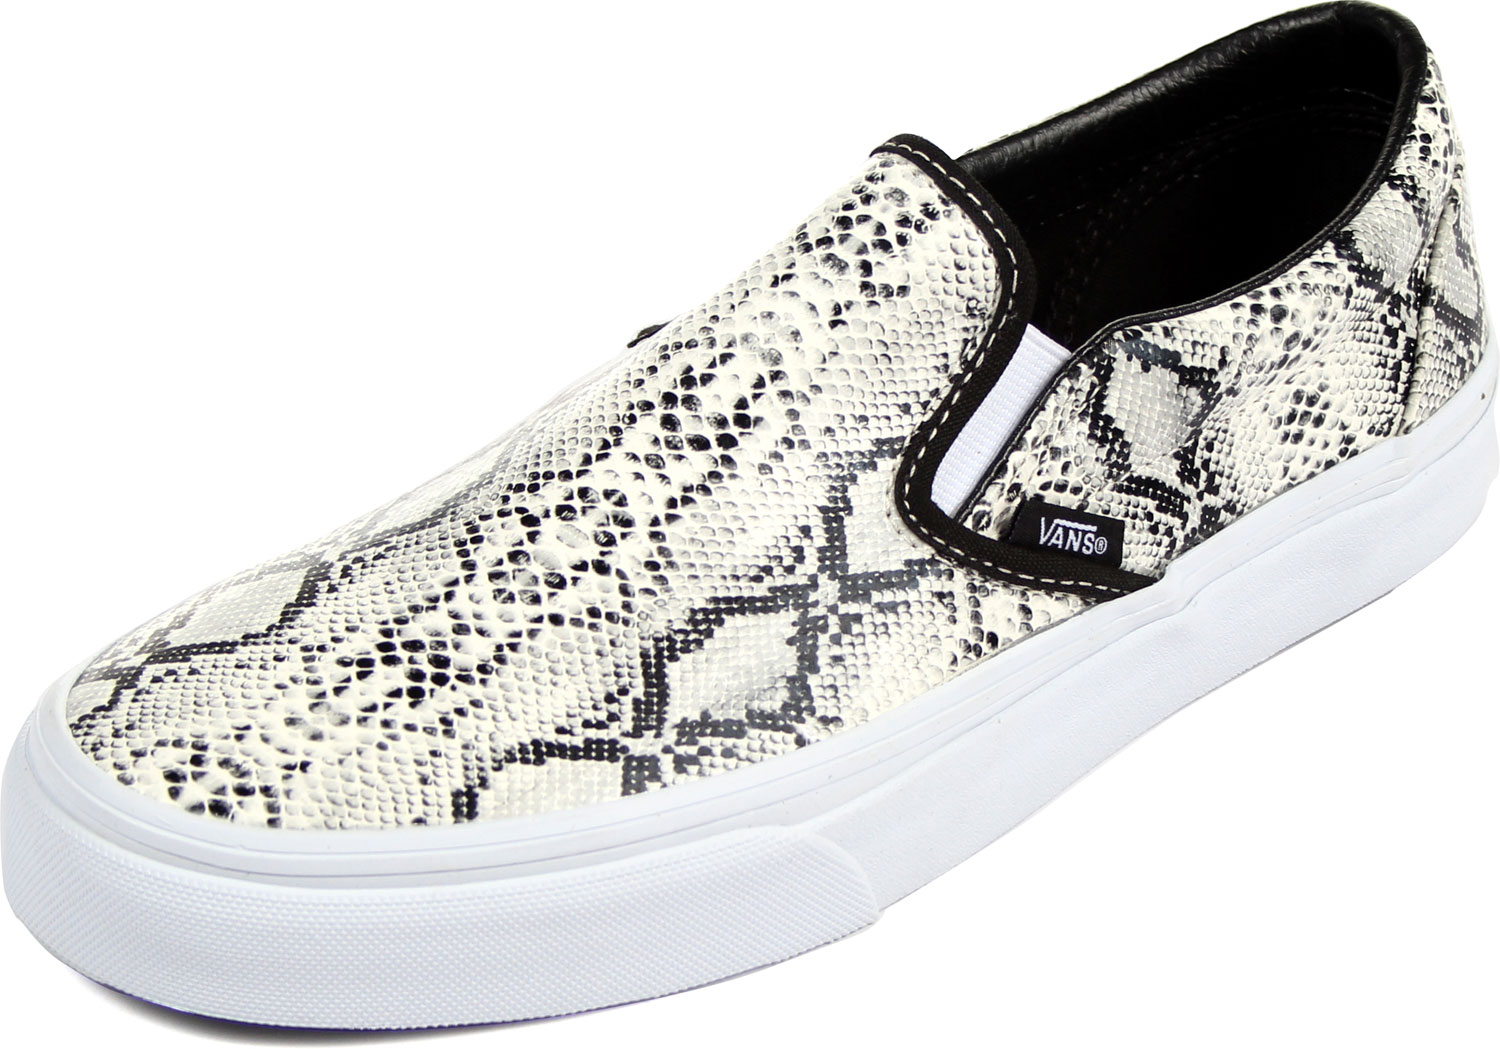 angst terwijl Weekendtas Vans - Unisex Adult Classic Slip-On Shoes in (Leather/Snake) Silver